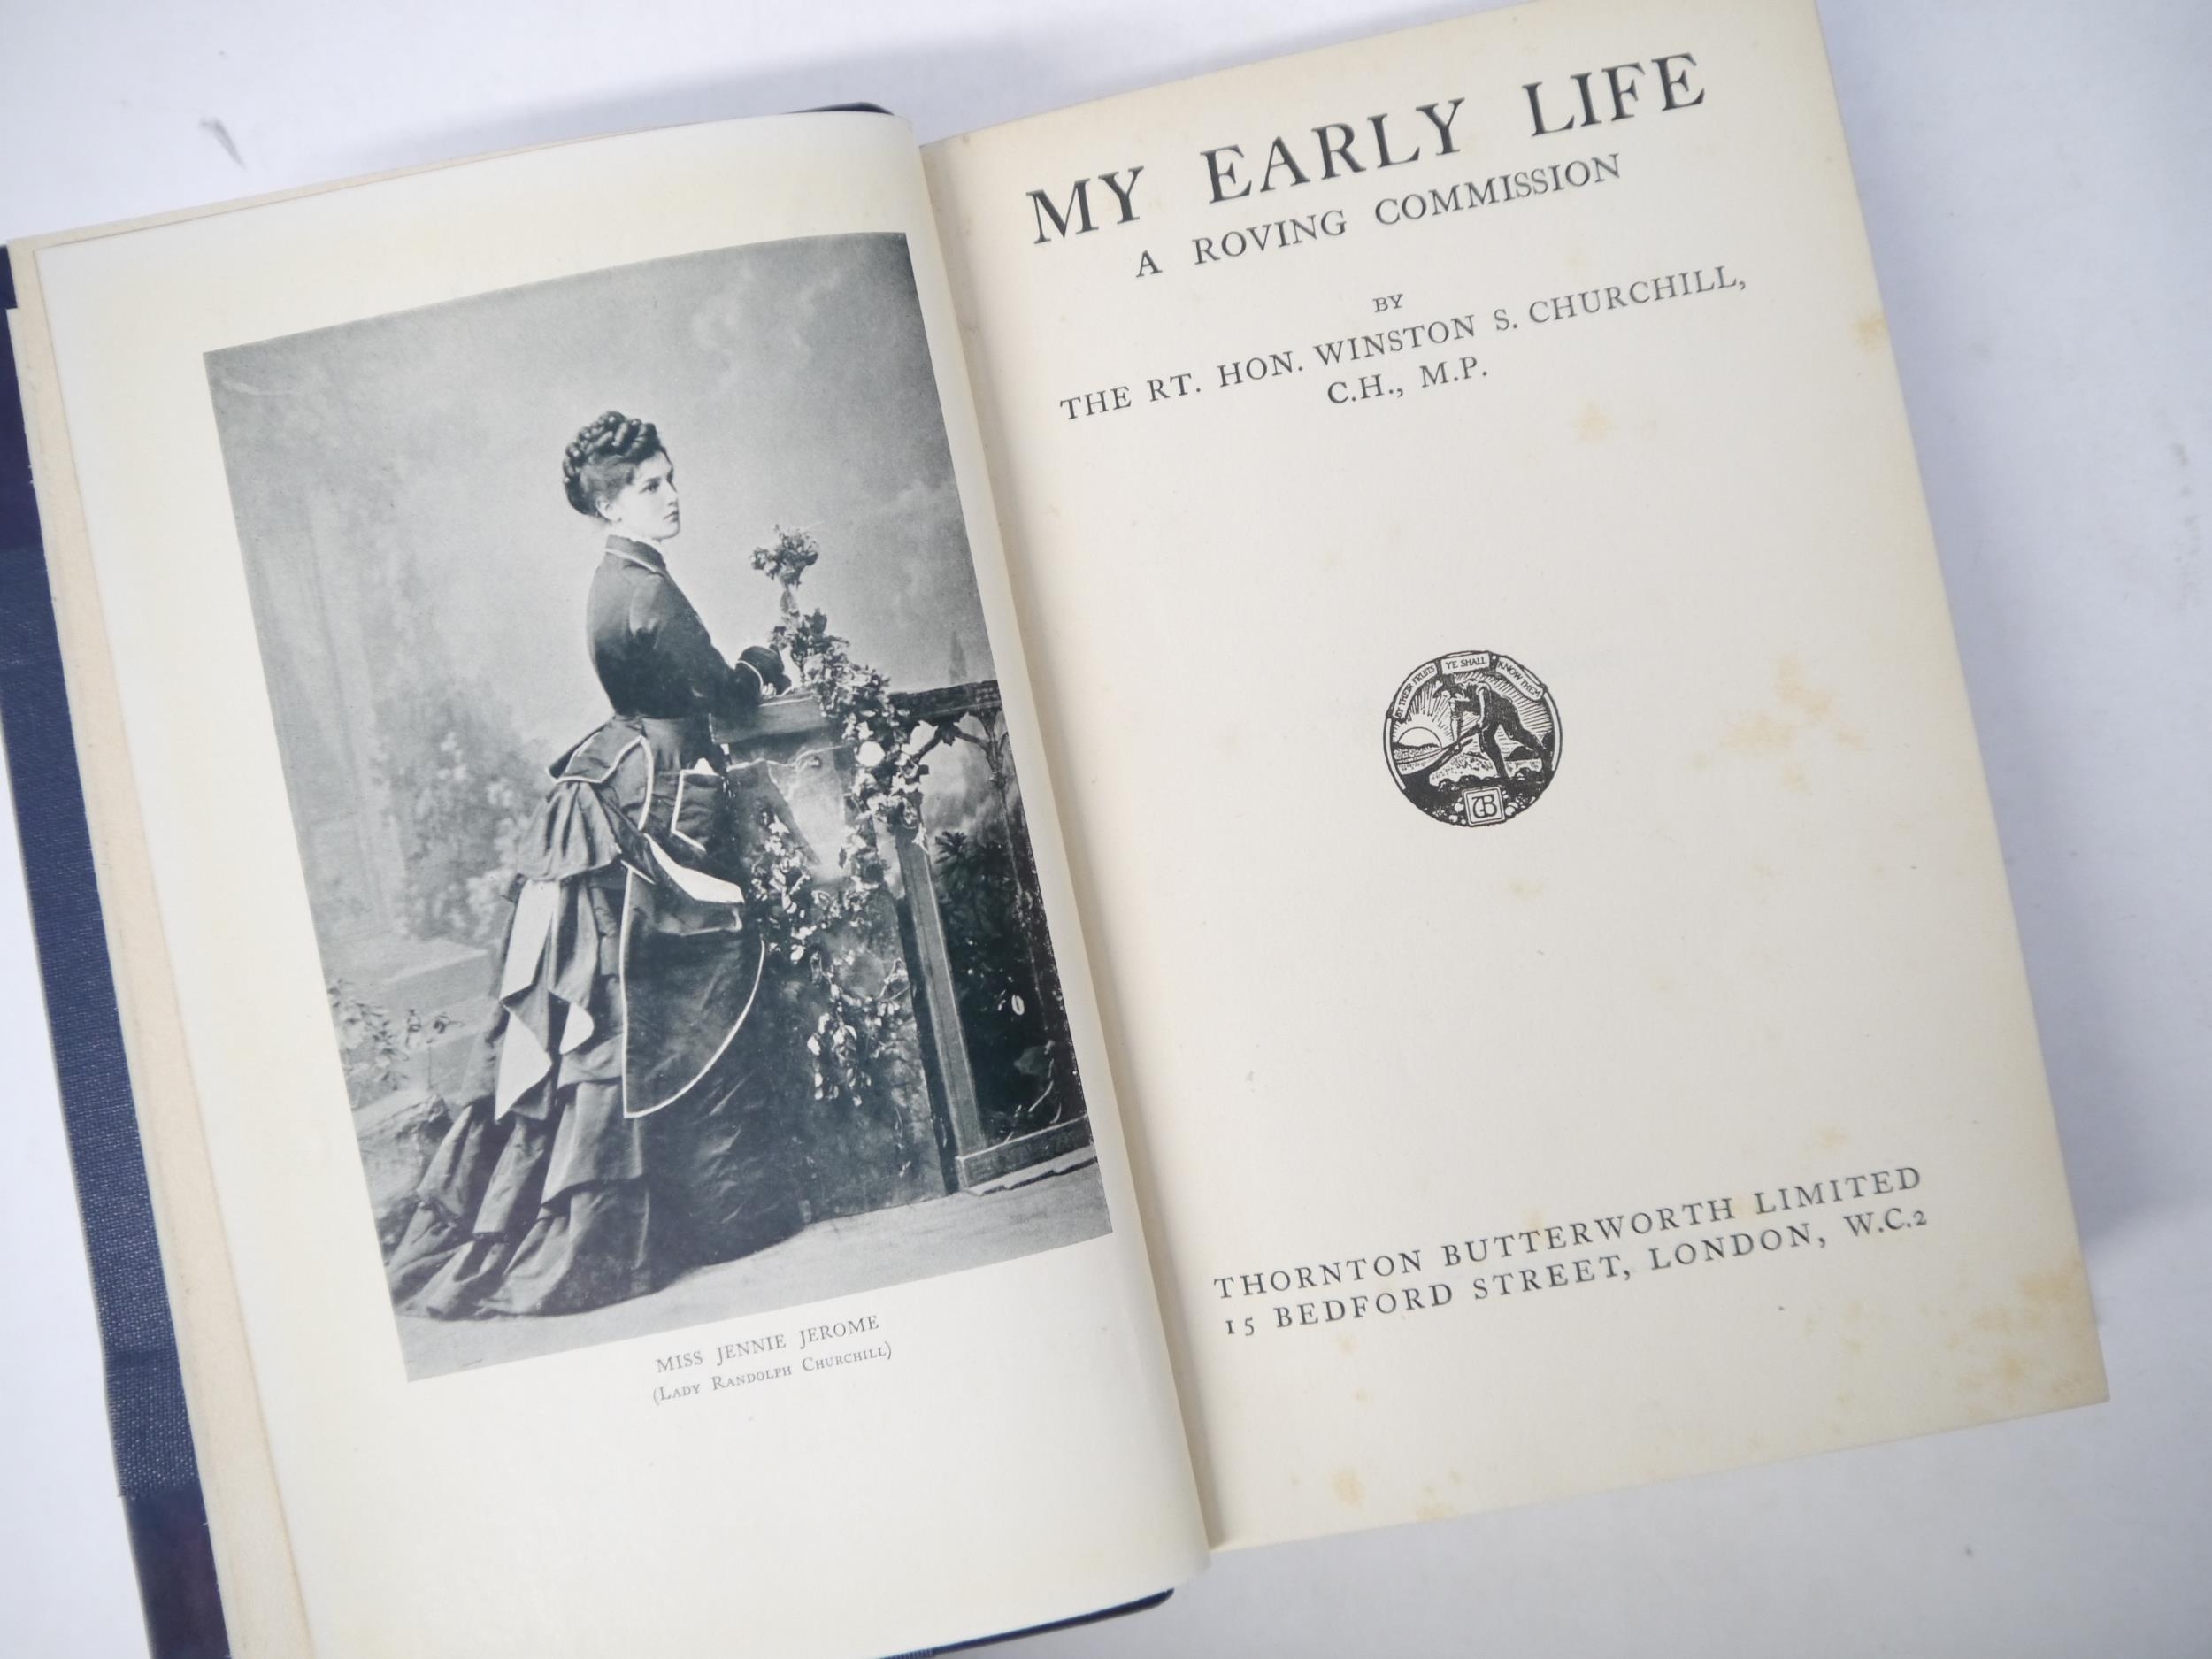 Winston S. Churchill: 'My Early Life. A Roving Commission.', London, Thornton Butterworth, 1930, 1st - Image 2 of 23